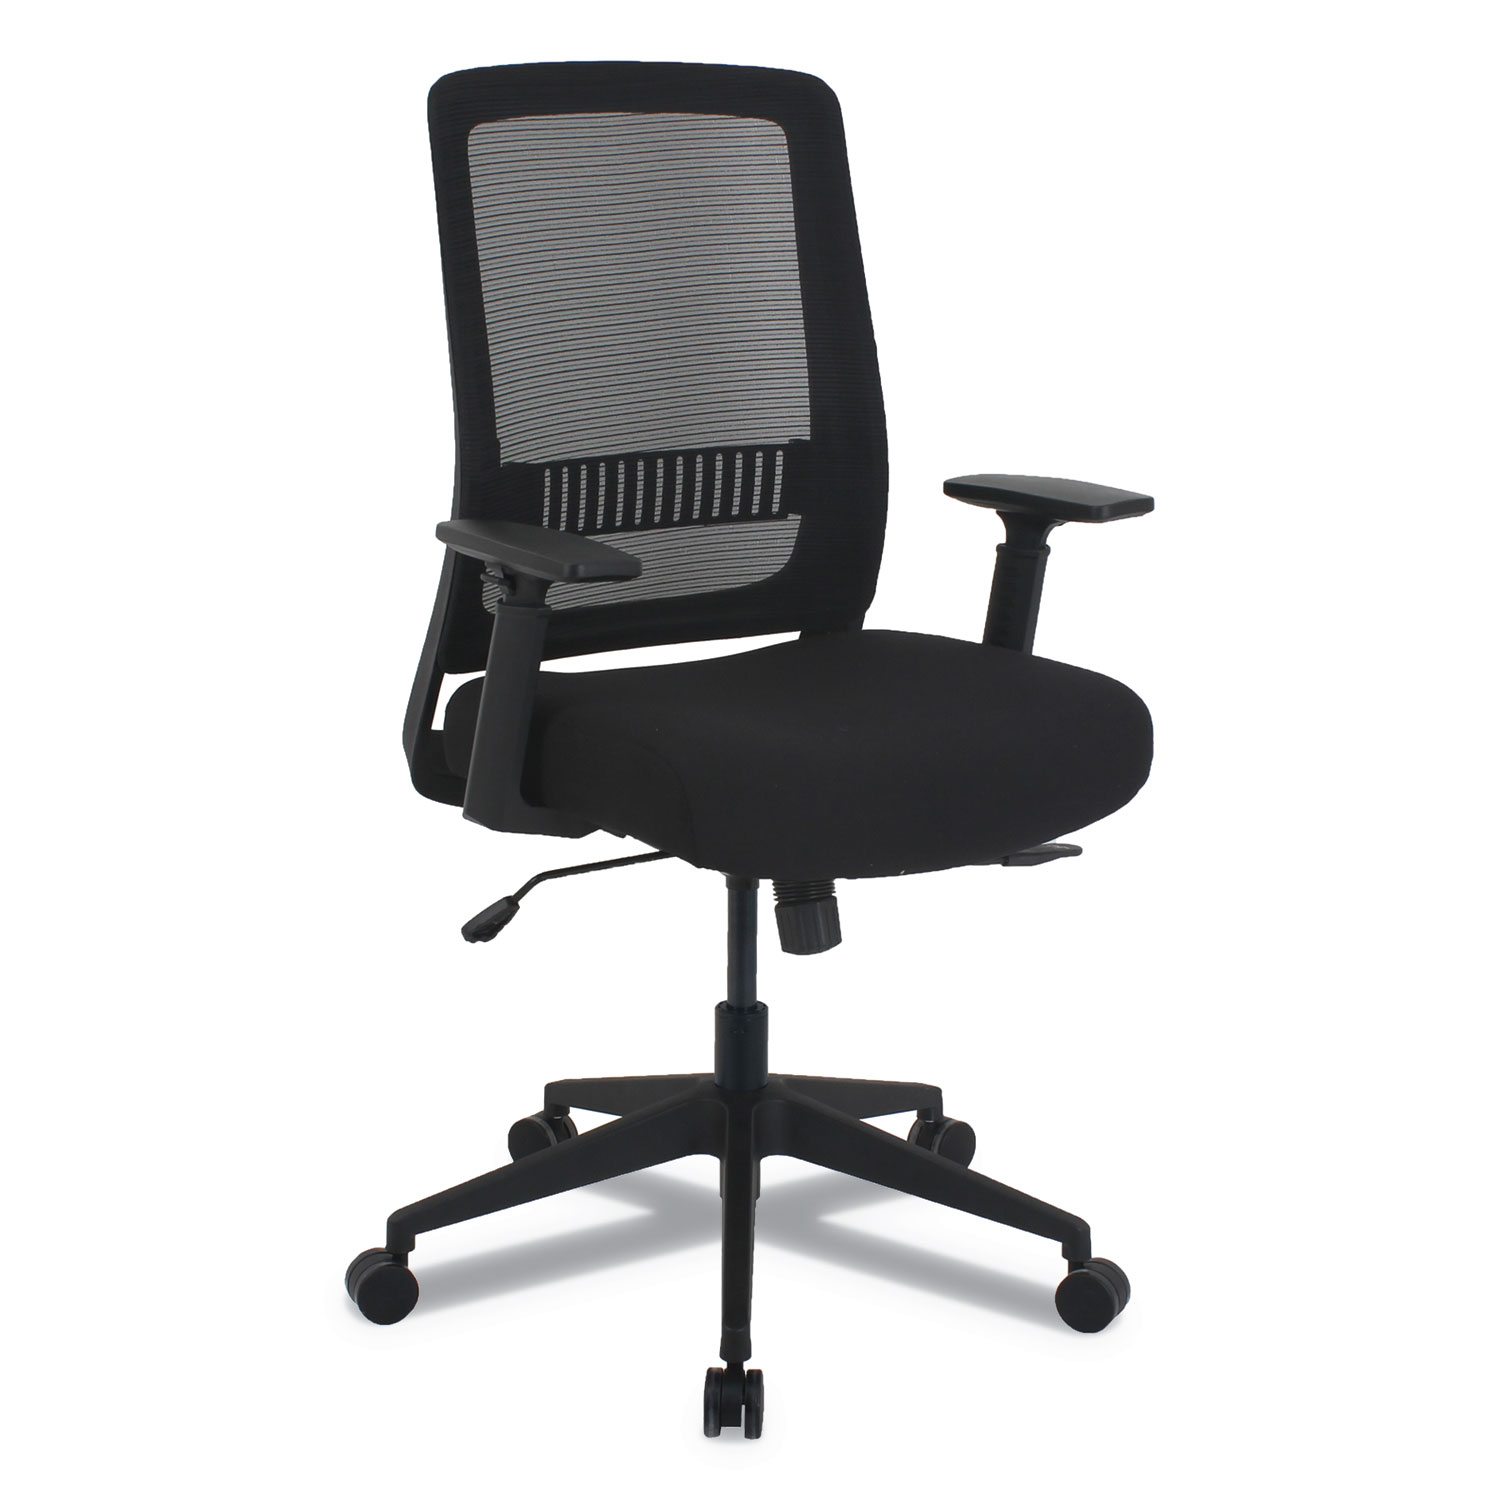  Alera ALEEY4214S Alera EY Series Multifunction Chair, Supports up to 275 lbs., Black Seat/Black Back, Black Base (ALEEY4214S) 